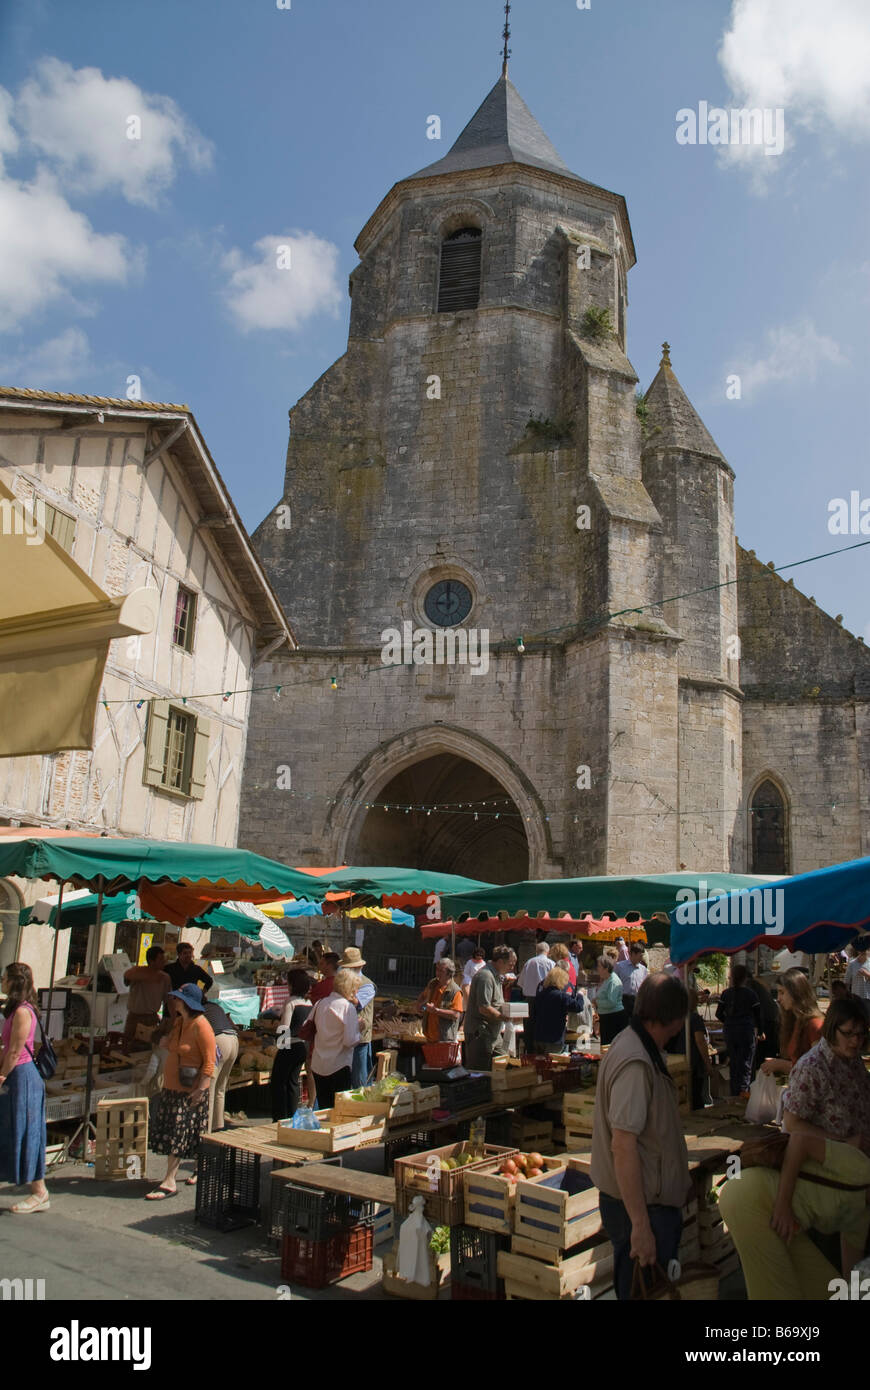 Church and French market stalls, France Stock Photo